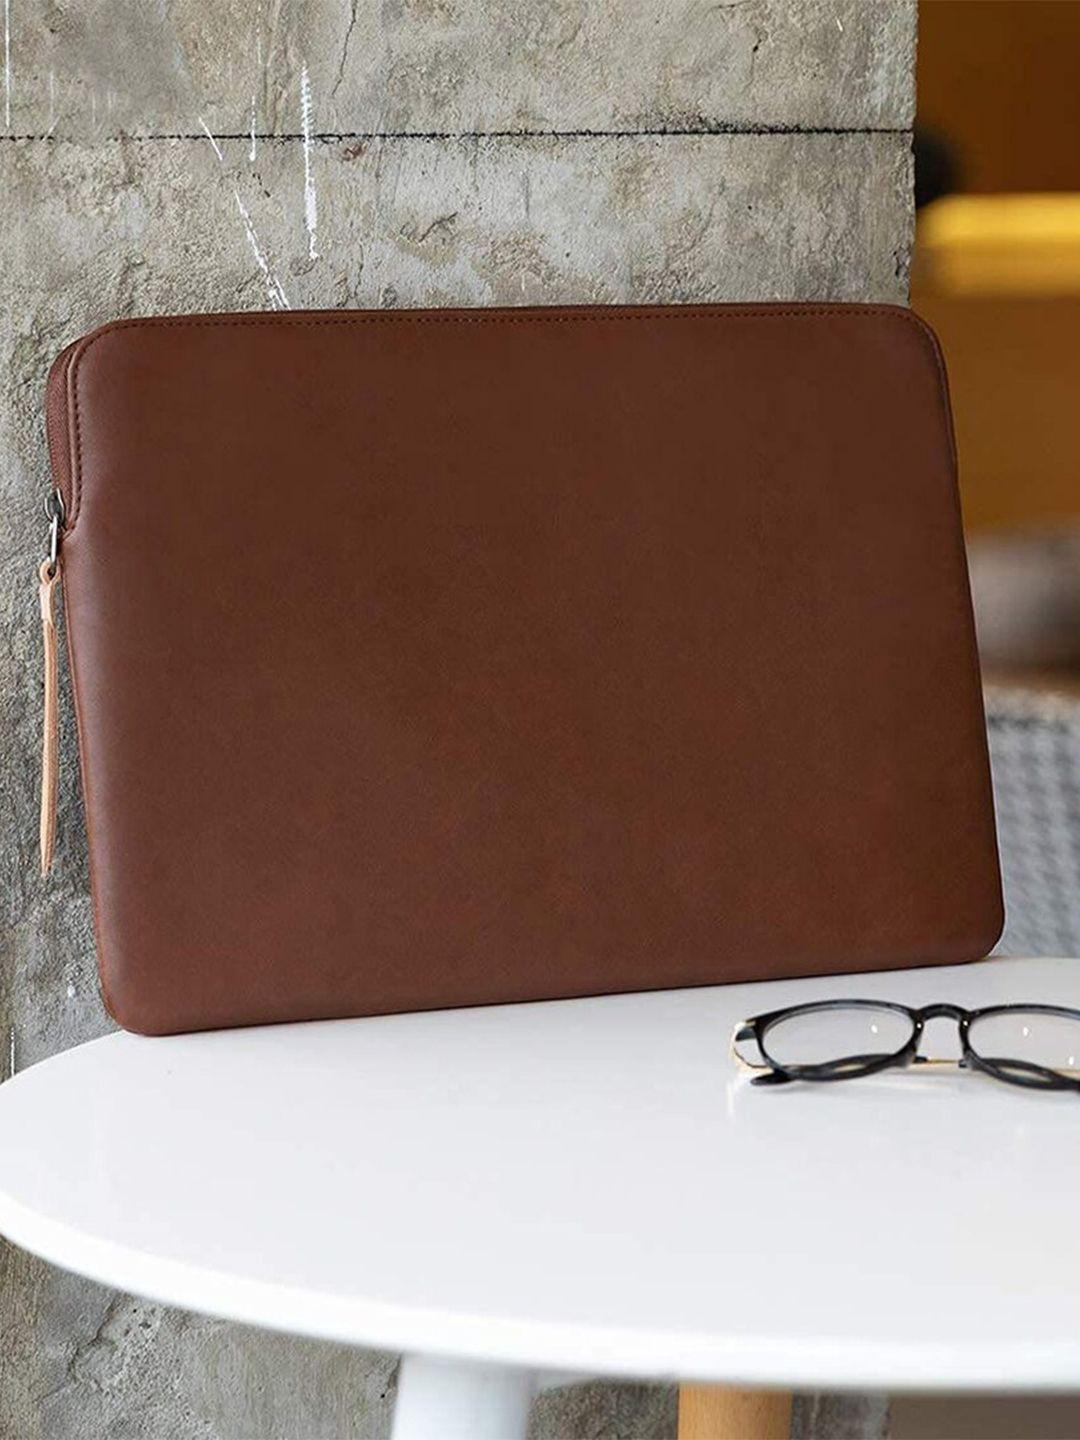 contacts unisex tan pu water resistant laptop sleeve